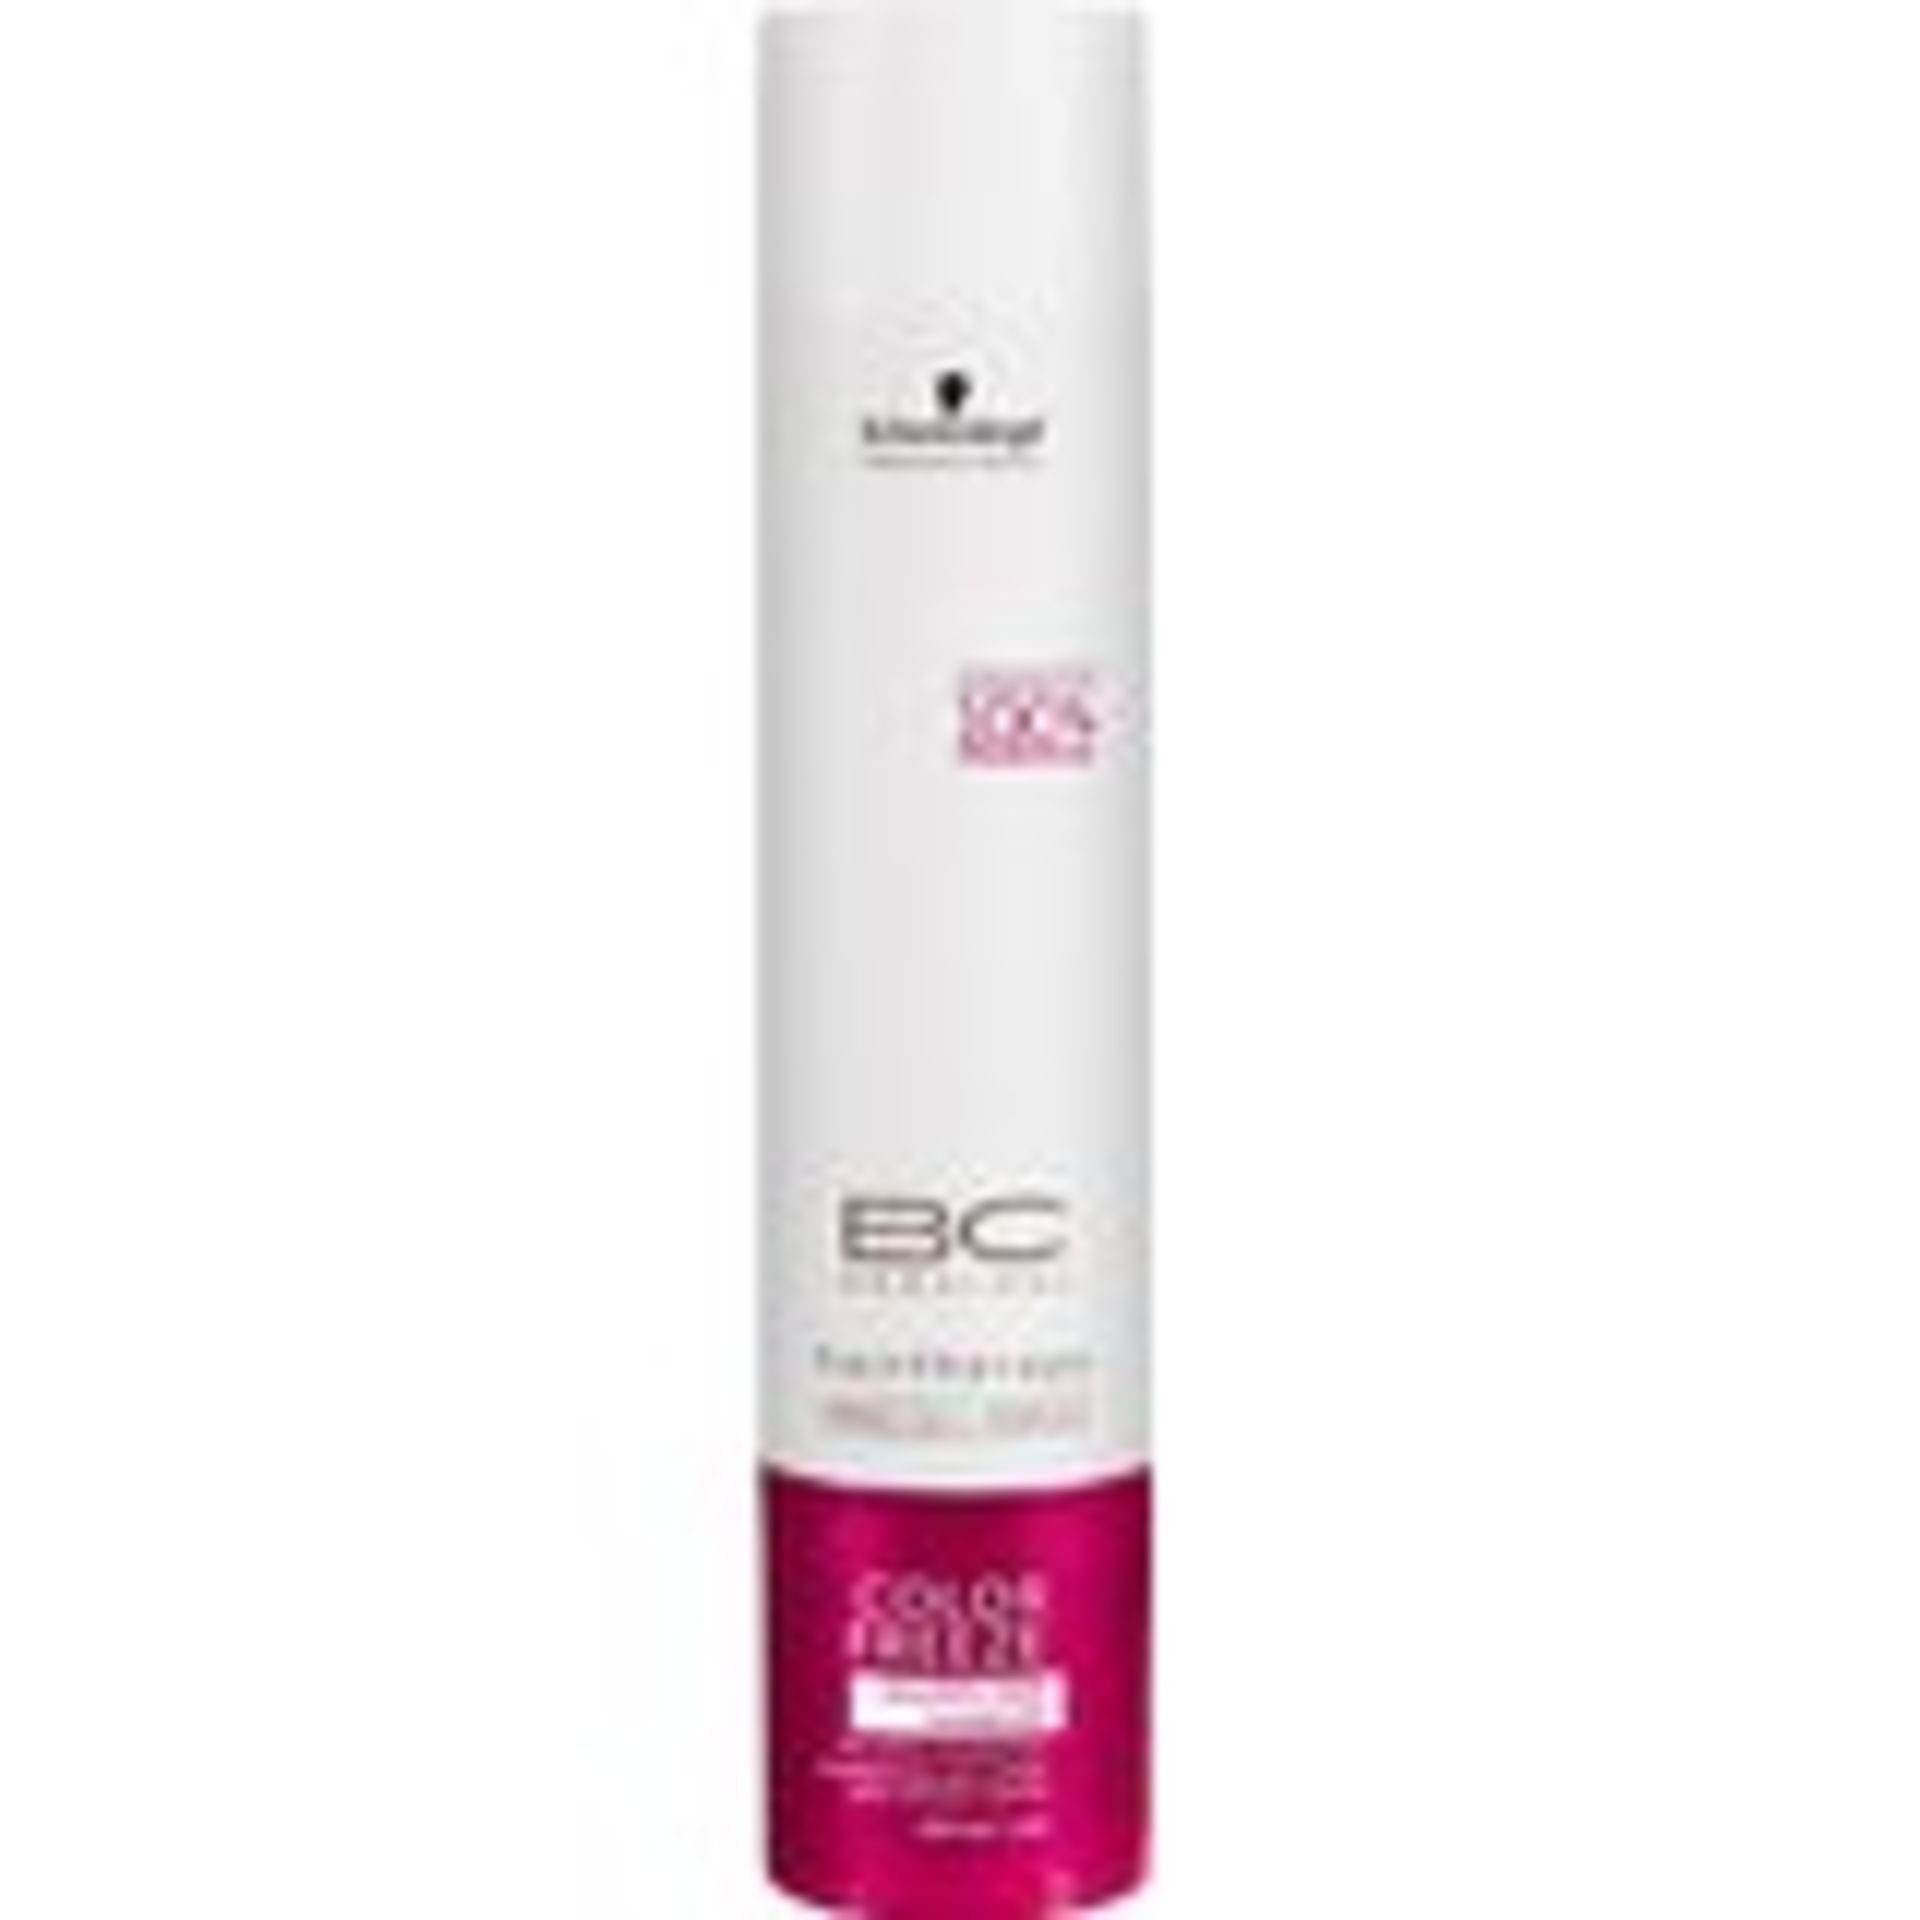 HAIR PRODUCTS - 1 Box of 29 units - Latest AMZ price £316 - Image 11 of 11